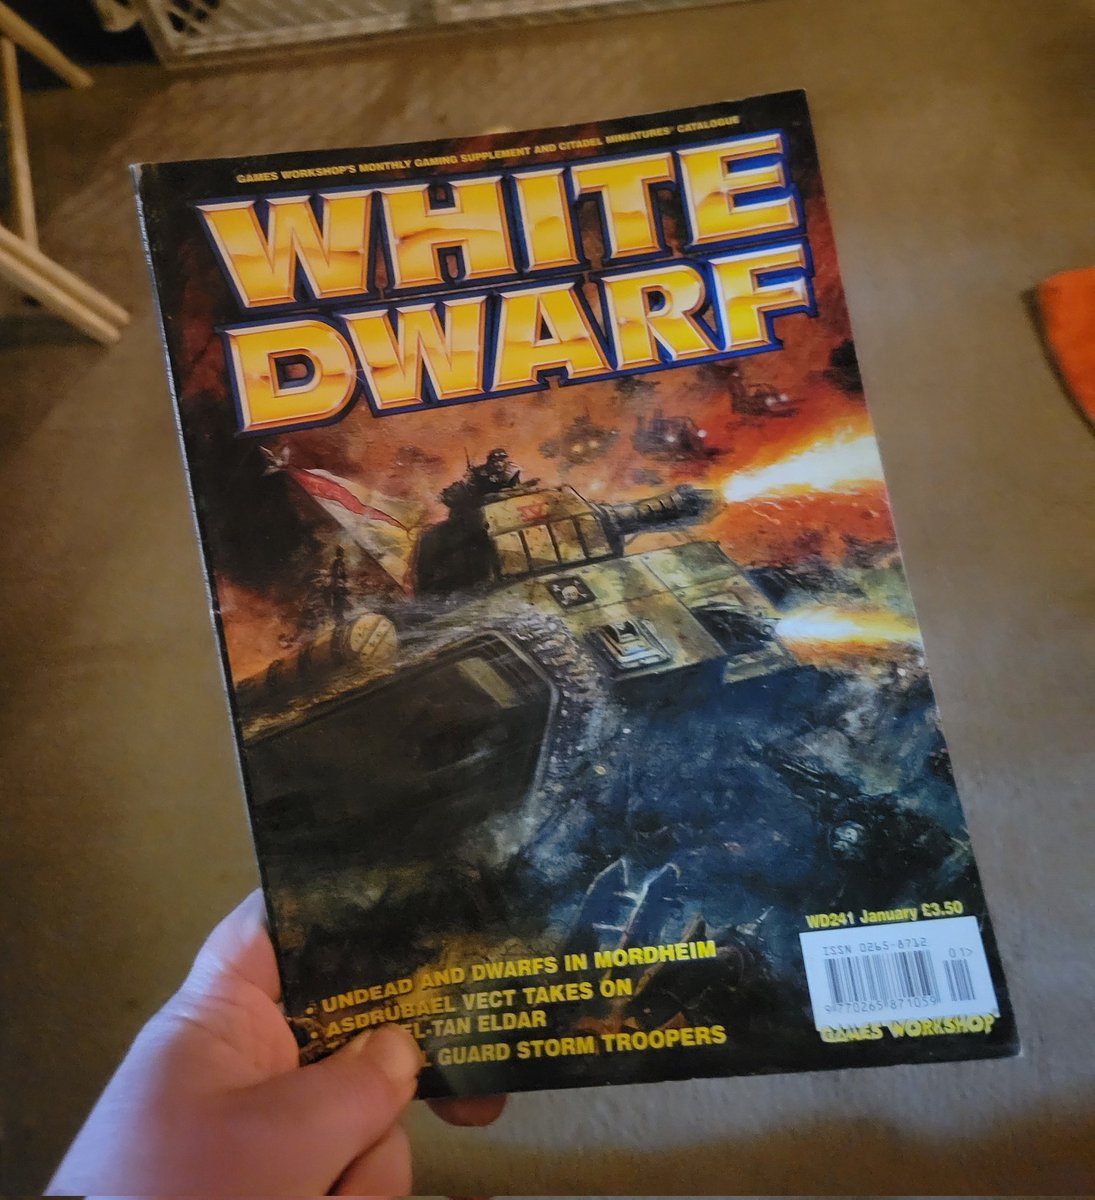 Found it!!! I had to dig through three of my archive boxes, but I located White Dwarf #241. So, the next retrospective is a go 👍 

#Warhammer #whitedwarf #warhammer40k #oldhammer #archive #warhammercommunity